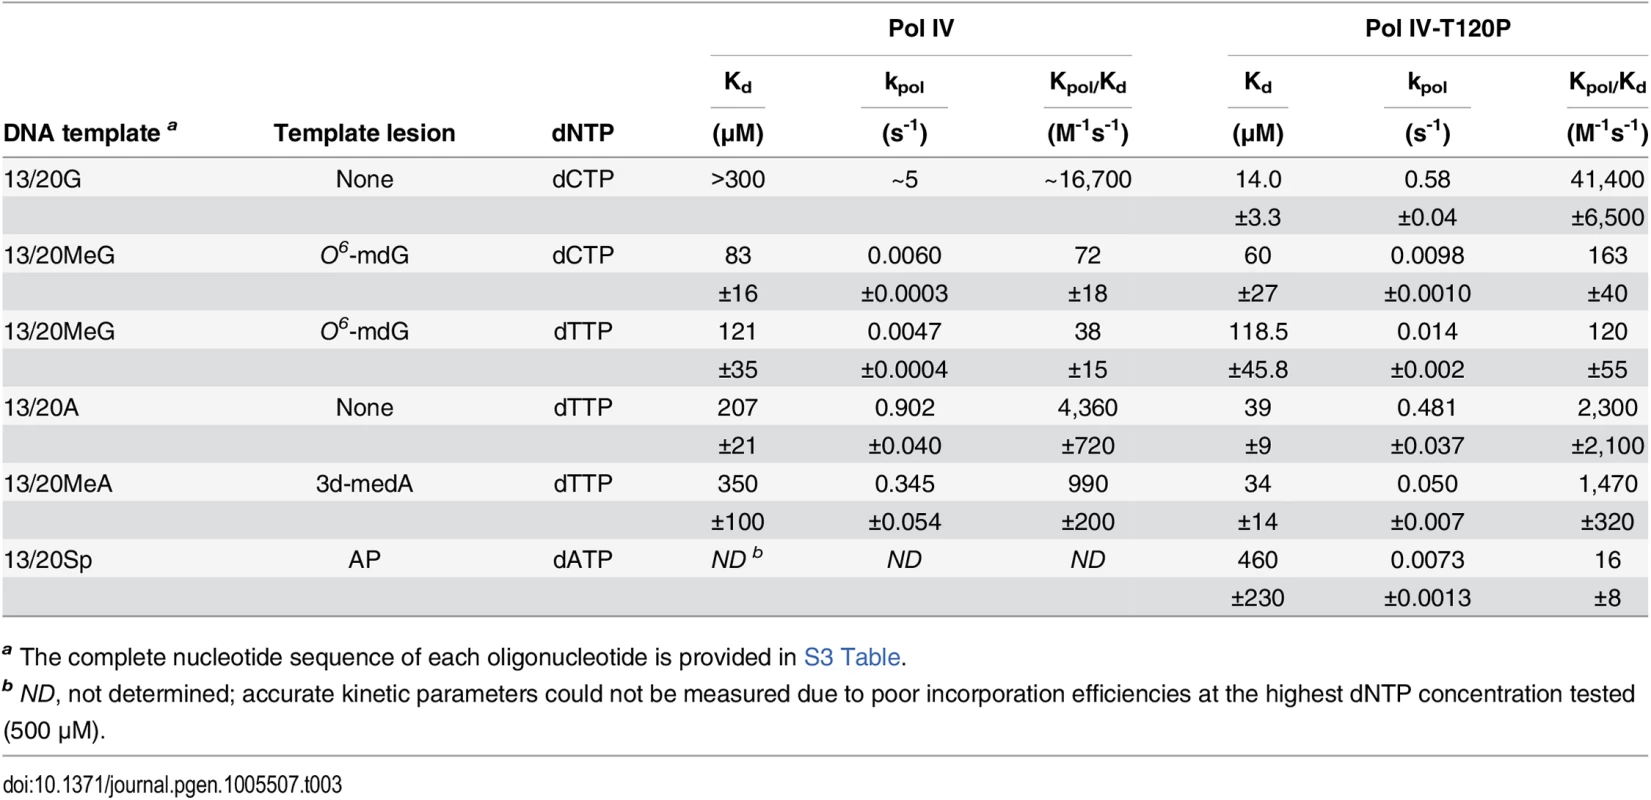 Kinetic constants for wild type Pol IV and Pol IV-T120P nucleotide incorporation.